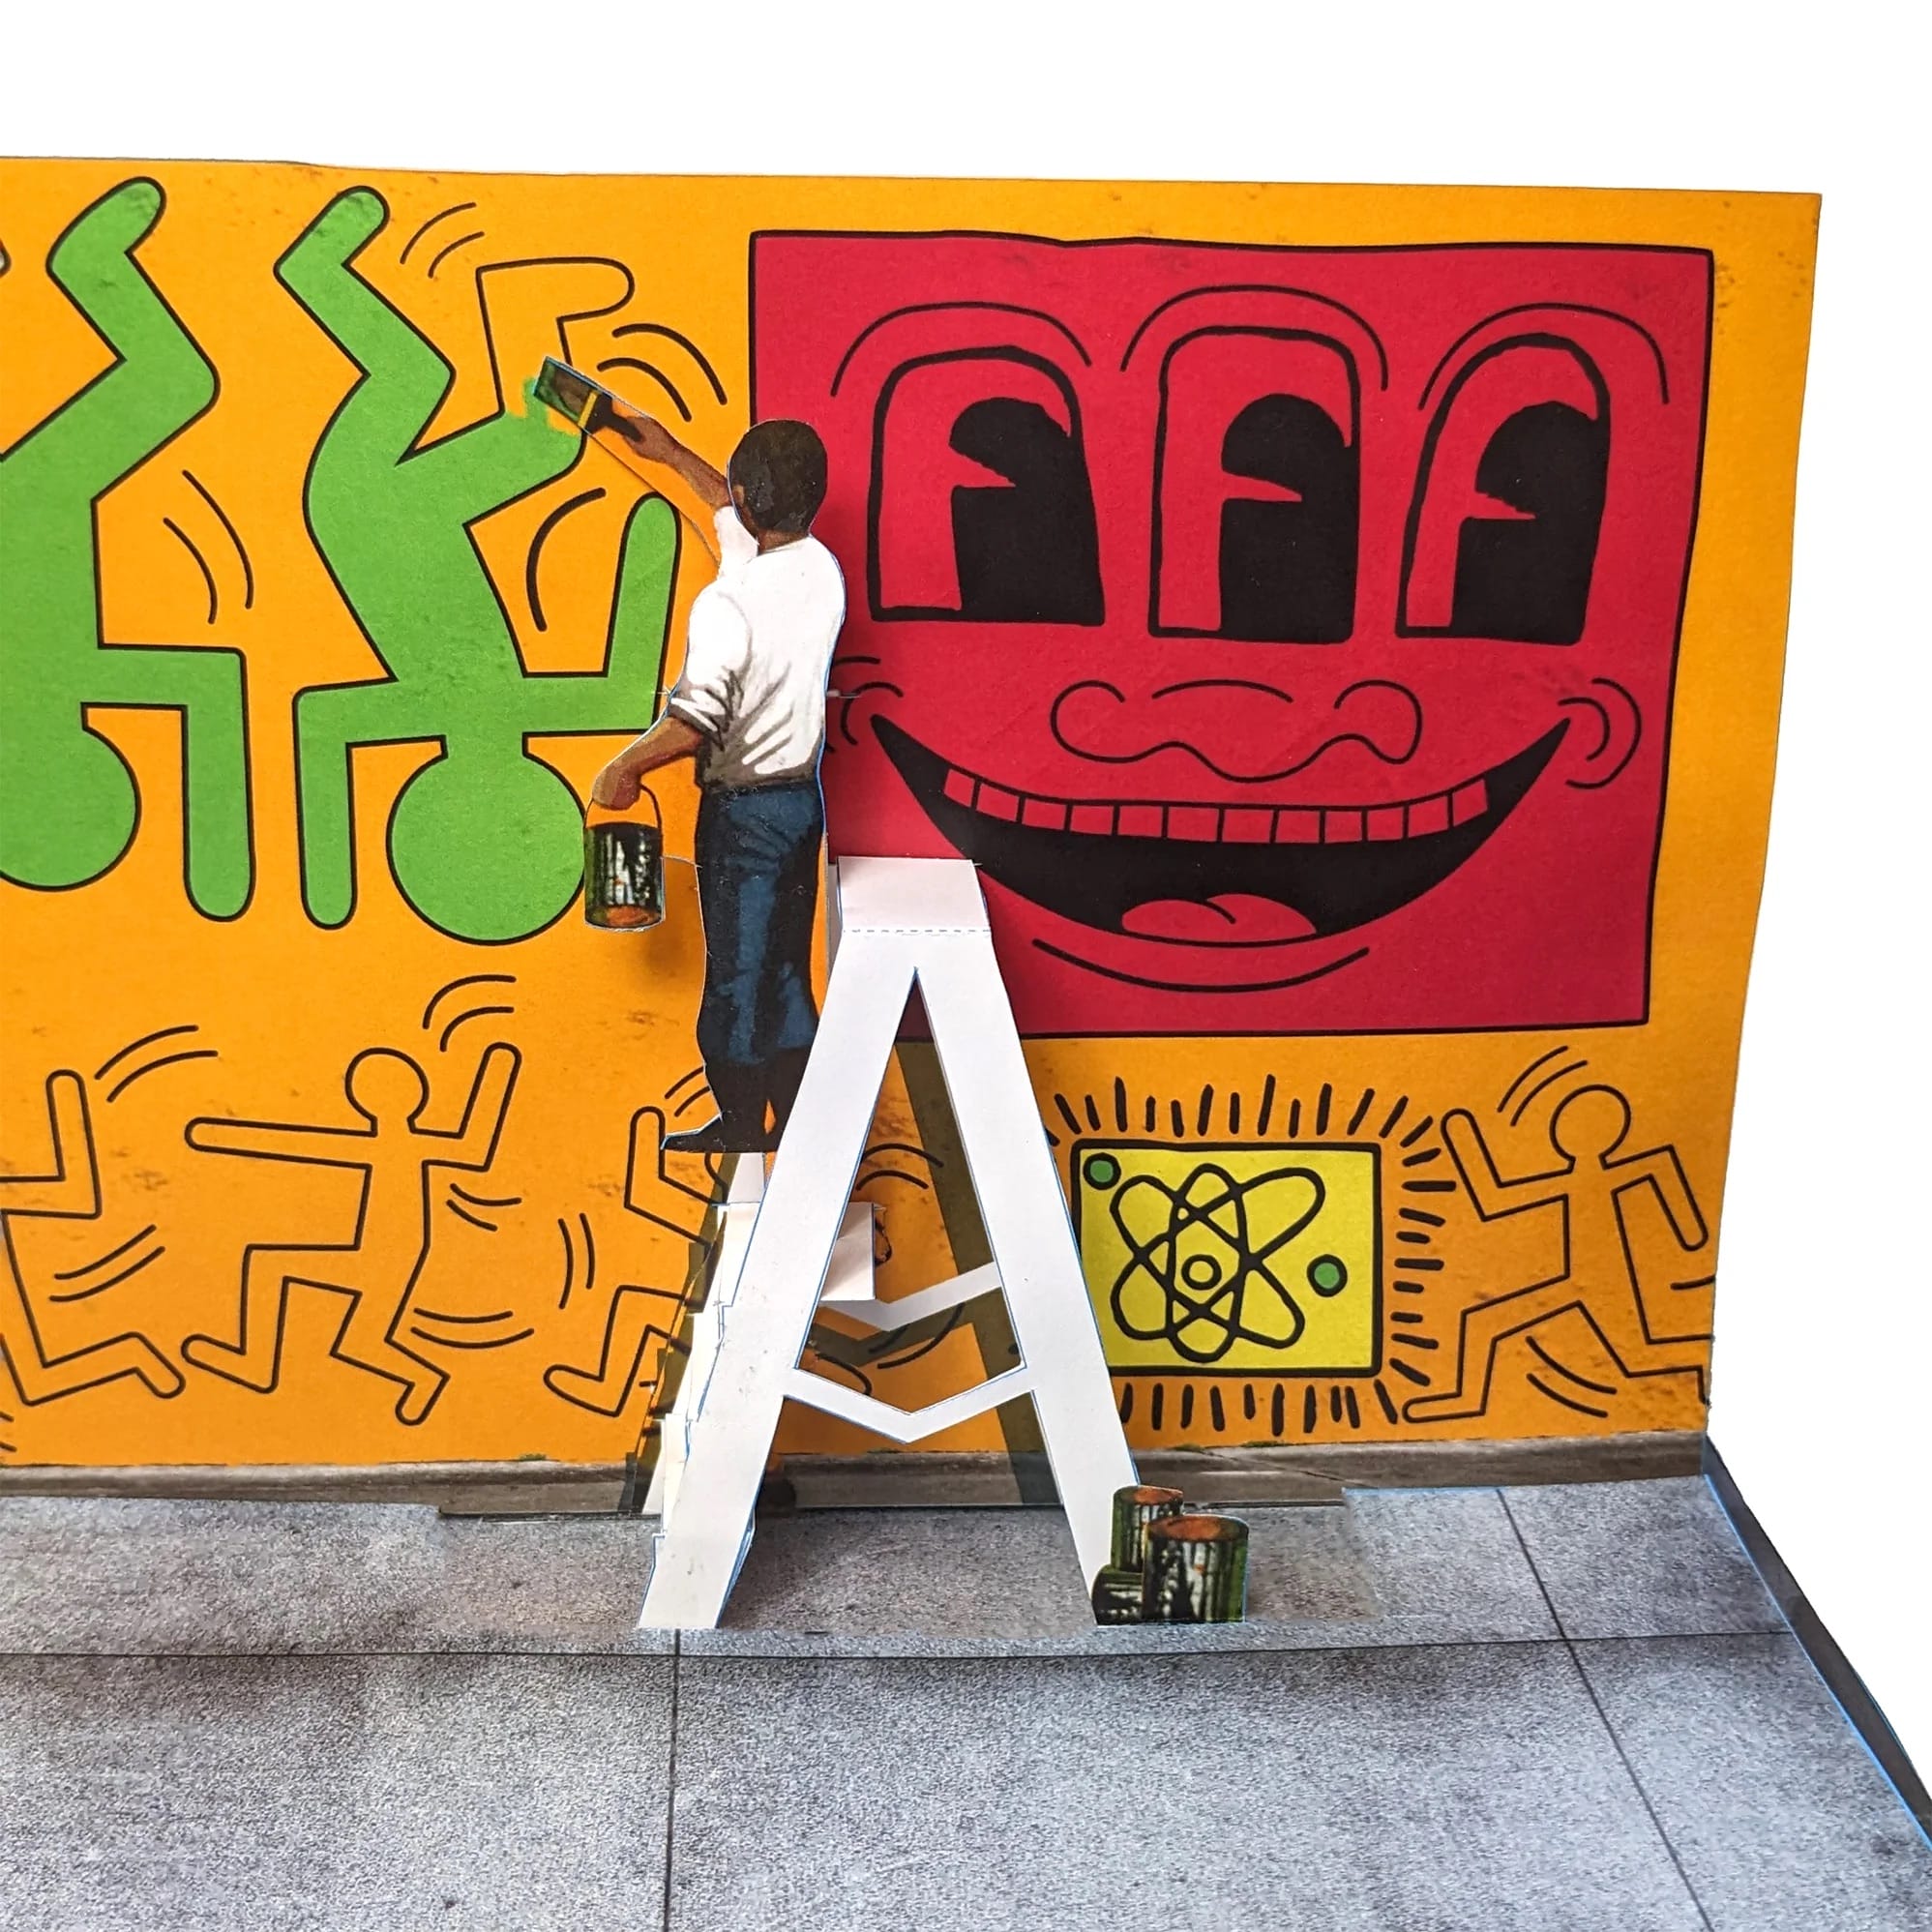 a pop-up paper spread from a pop-up book of artwork by Keith Haring, this piece depicting the artist working on a mural